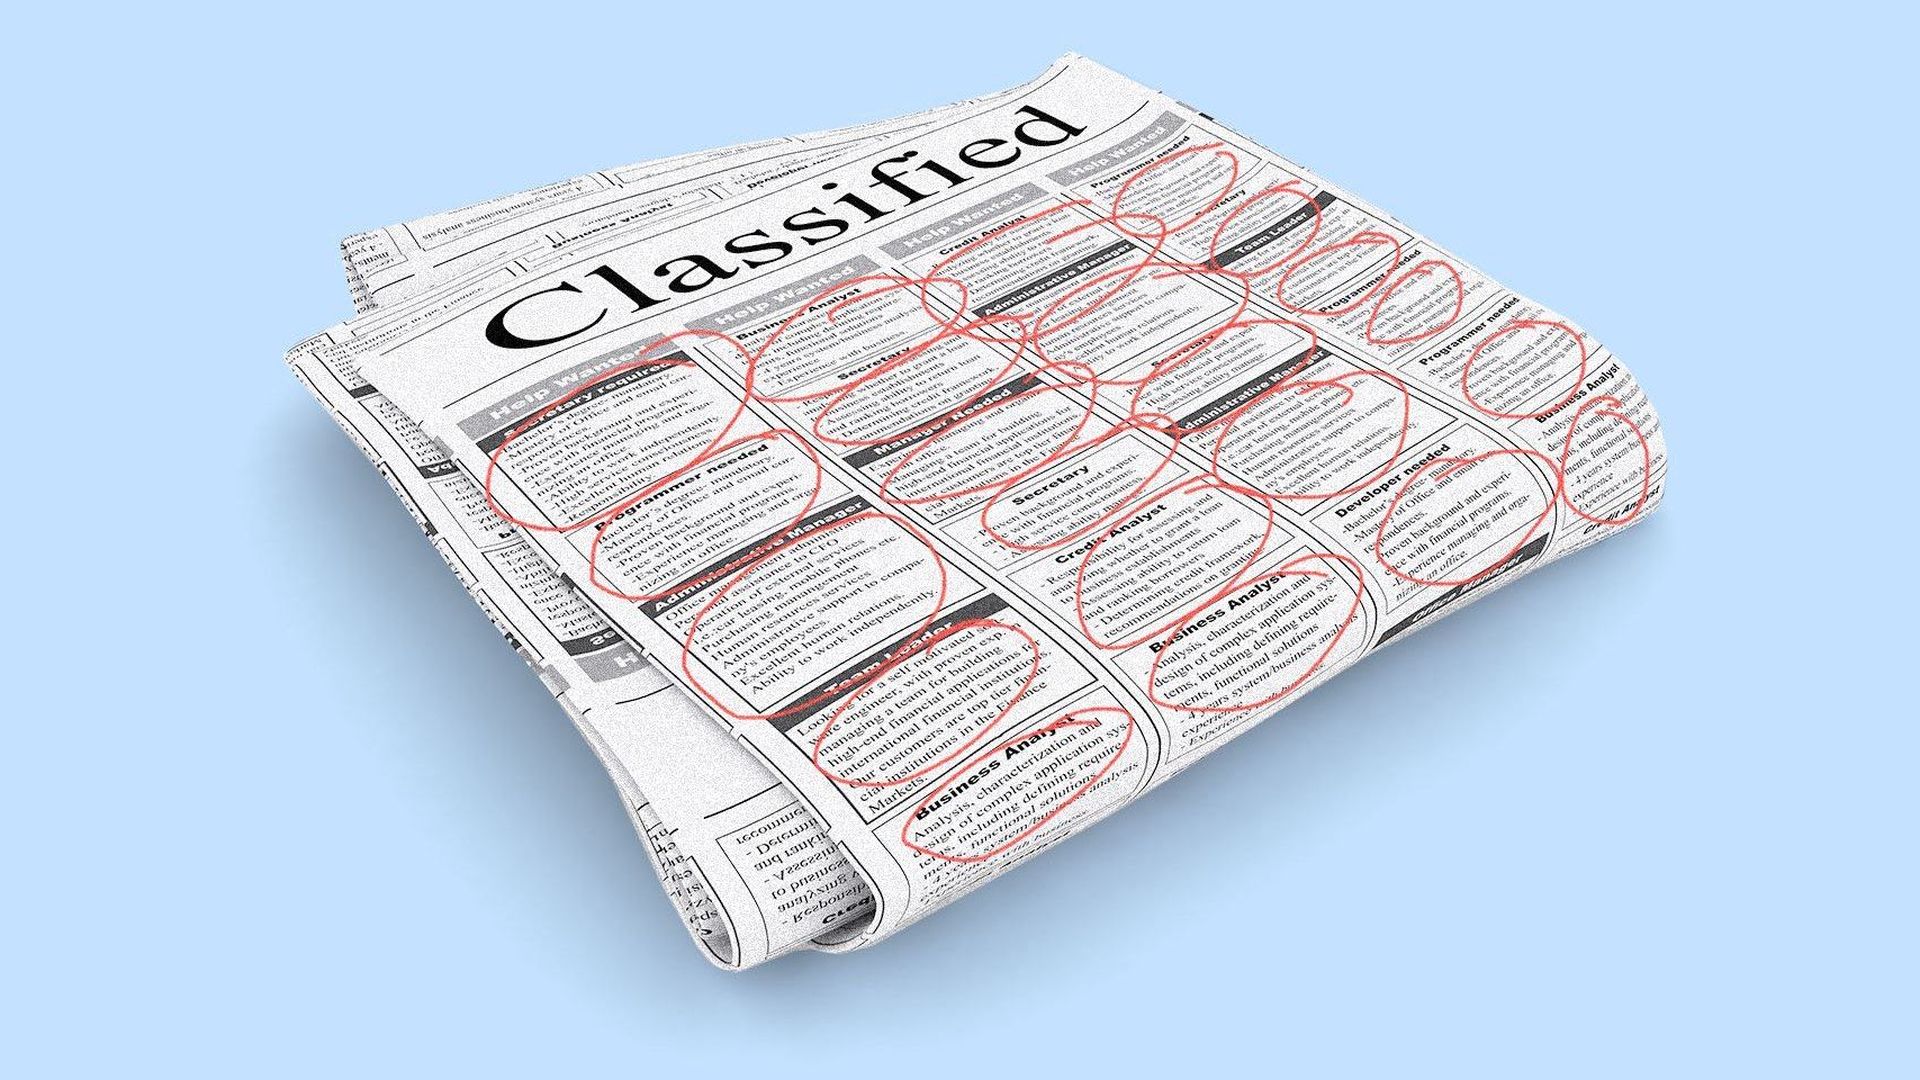 Illustration of the classified section of a newspaper with all the postings circled in red